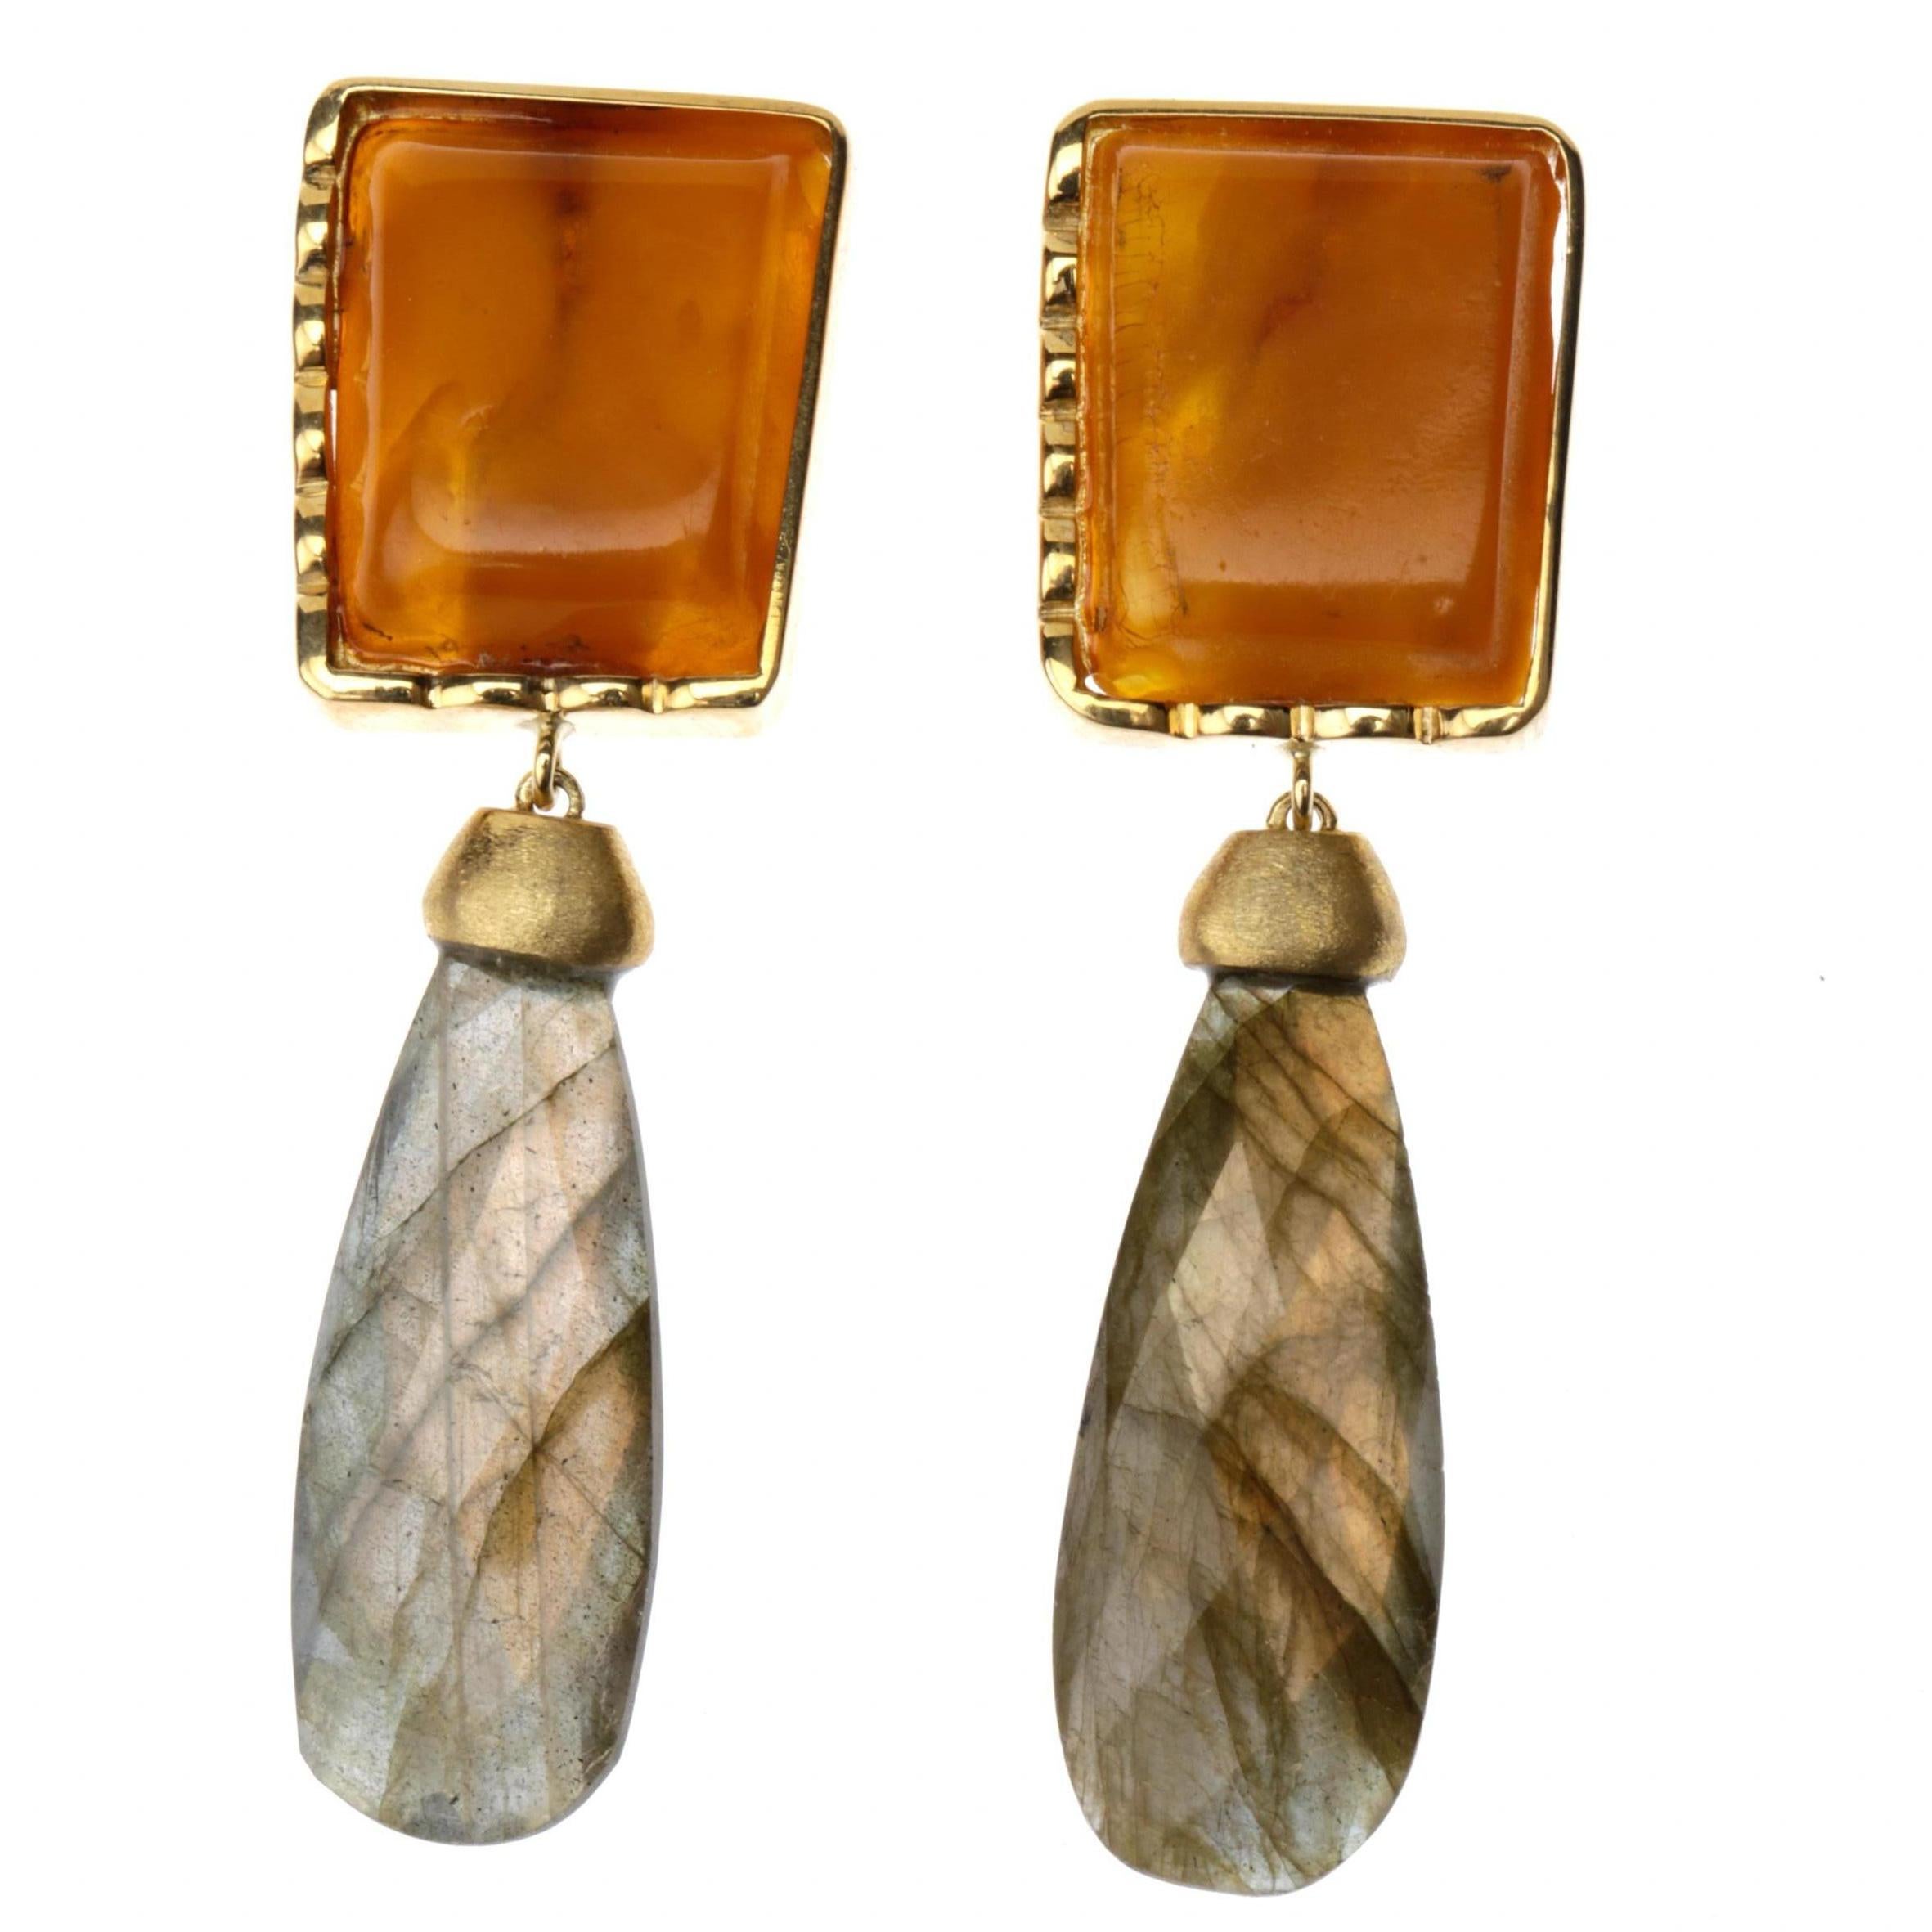 Antiques baltic Amber 18k Gold  gr.13,80 labradorite  faced drops length 6cm.
All Giulia Colussi jewelry is new and has never been previously owned or worn. Each item will arrive at your door beautifully gift wrapped in our boxes, put inside an